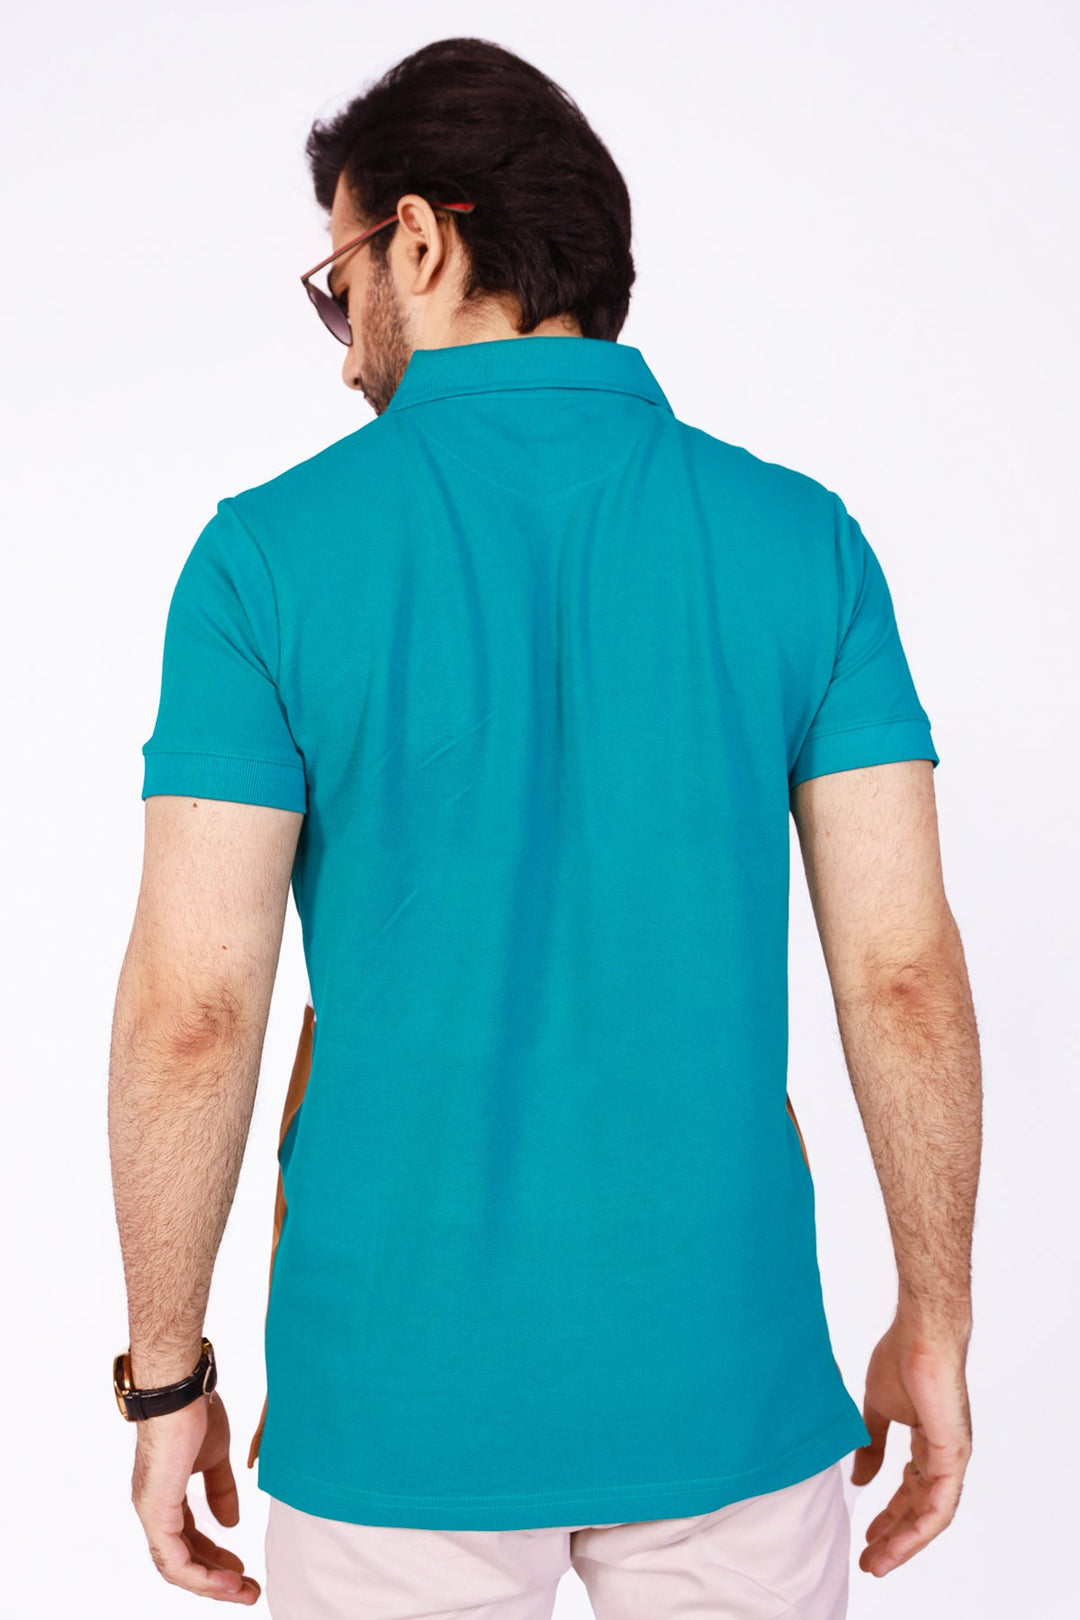 Teal Tri-Color Embroidered Polo Shirt - S22 - MP0068R